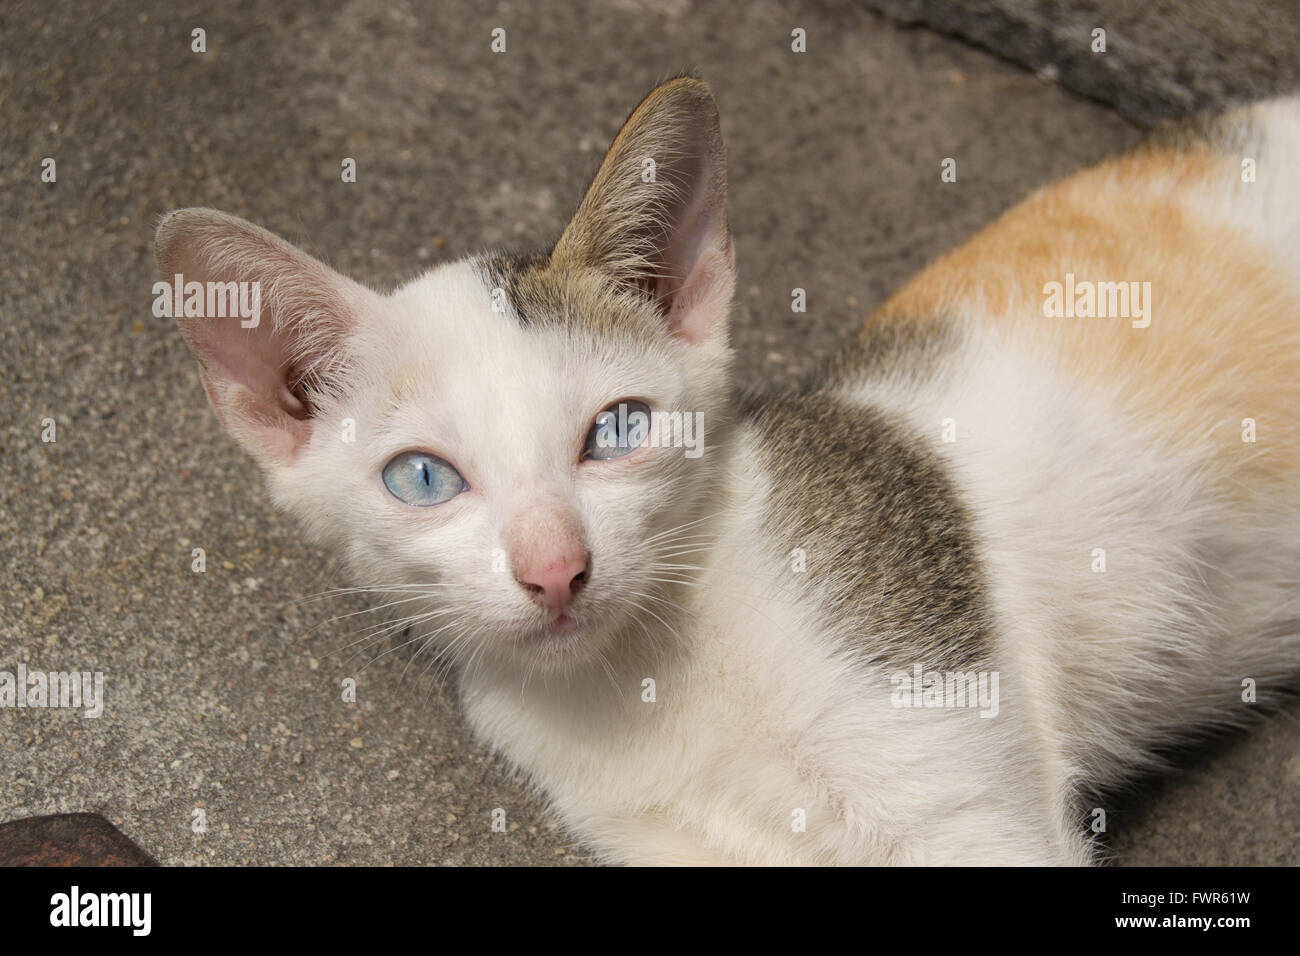 Young cat with blue eyes lying on the ground Stock Photo